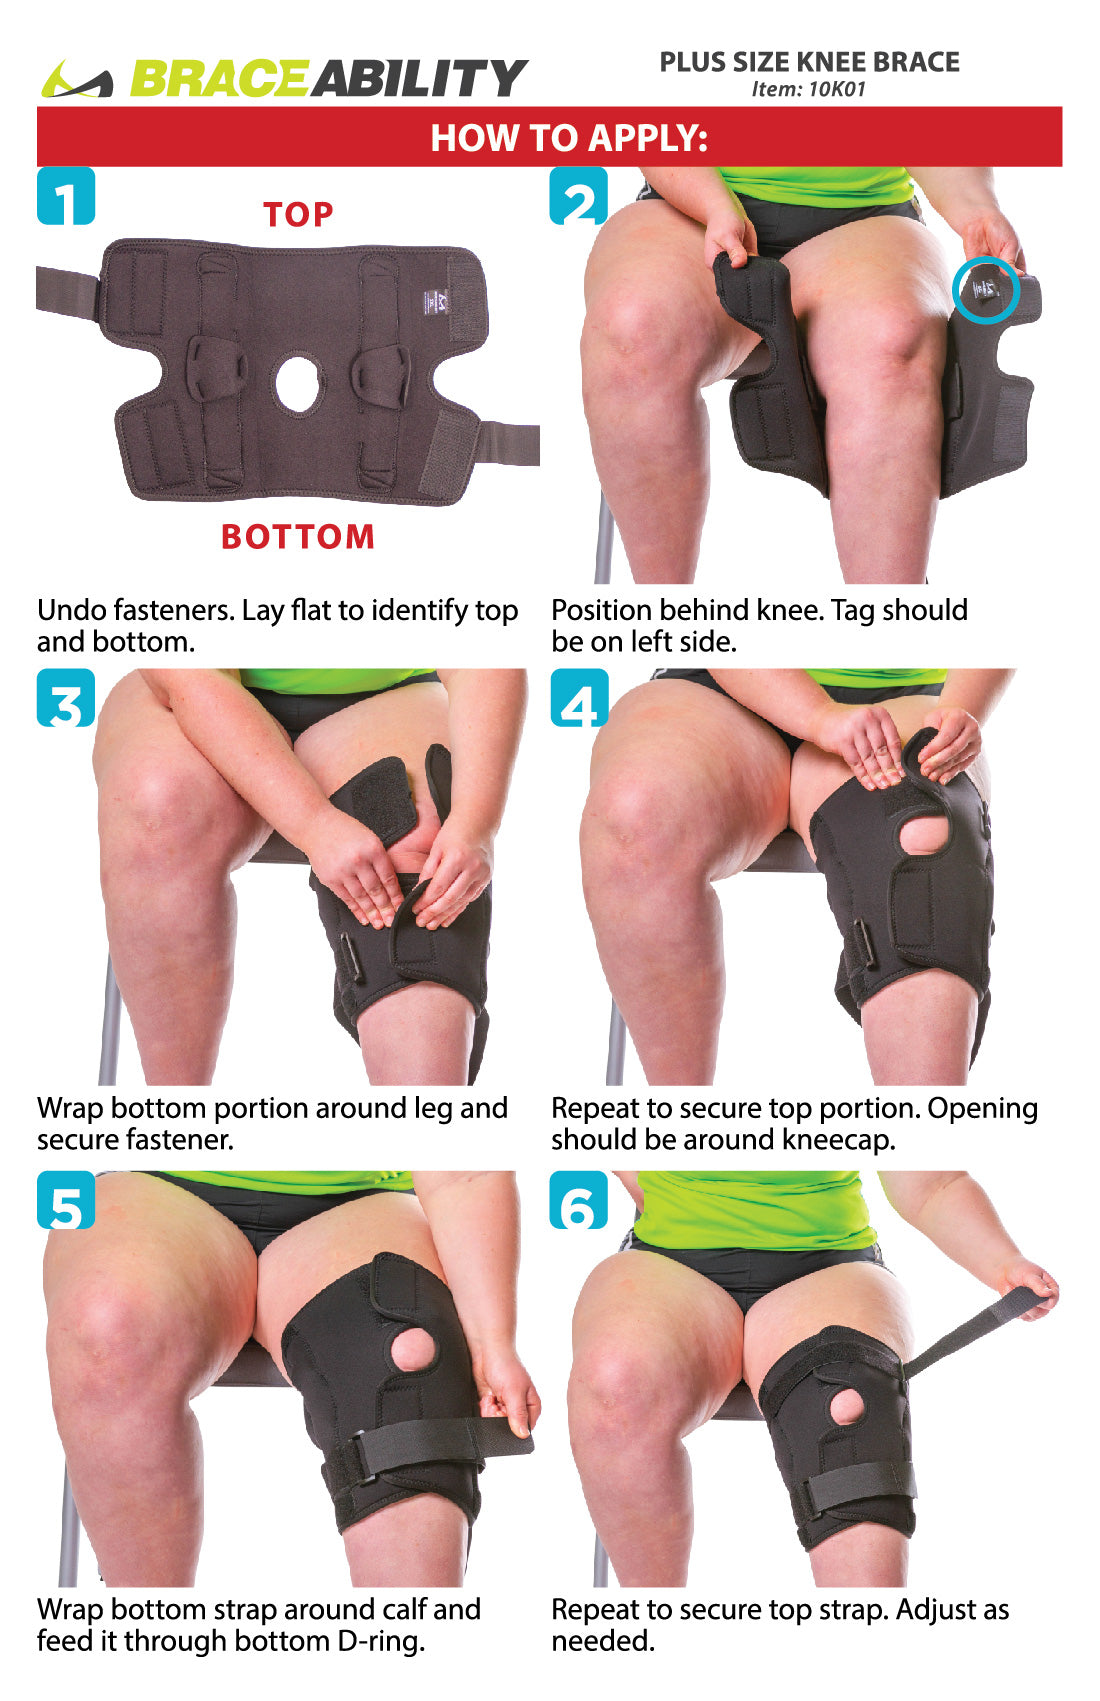 To apply this hinged wrap-around knee brace follow these 6-step instructions